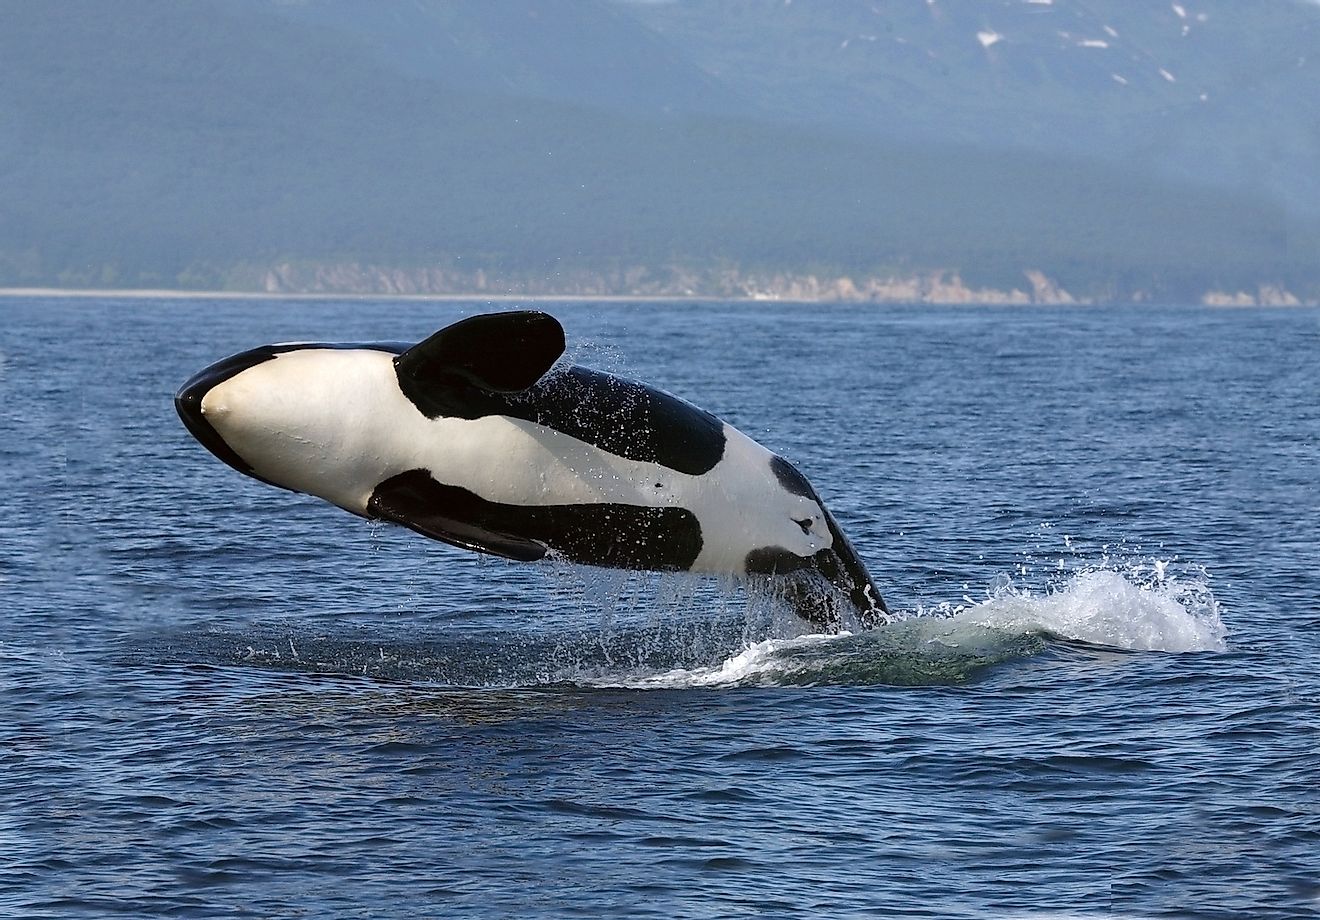 Astounding Facts About Killer Whales You Would Love To Know - WorldAtlas